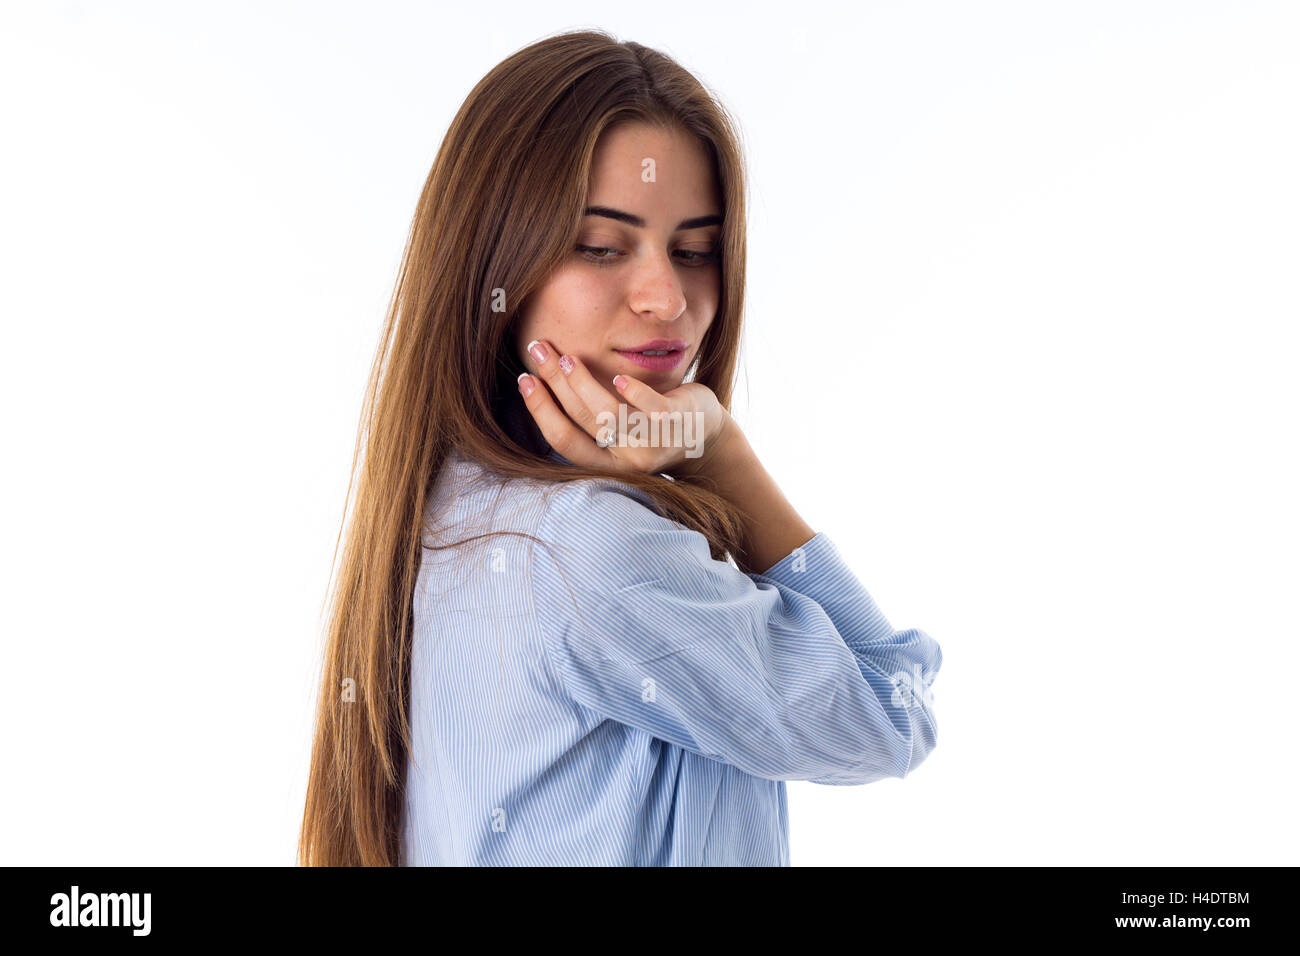 Young woman looking down Stock Photo